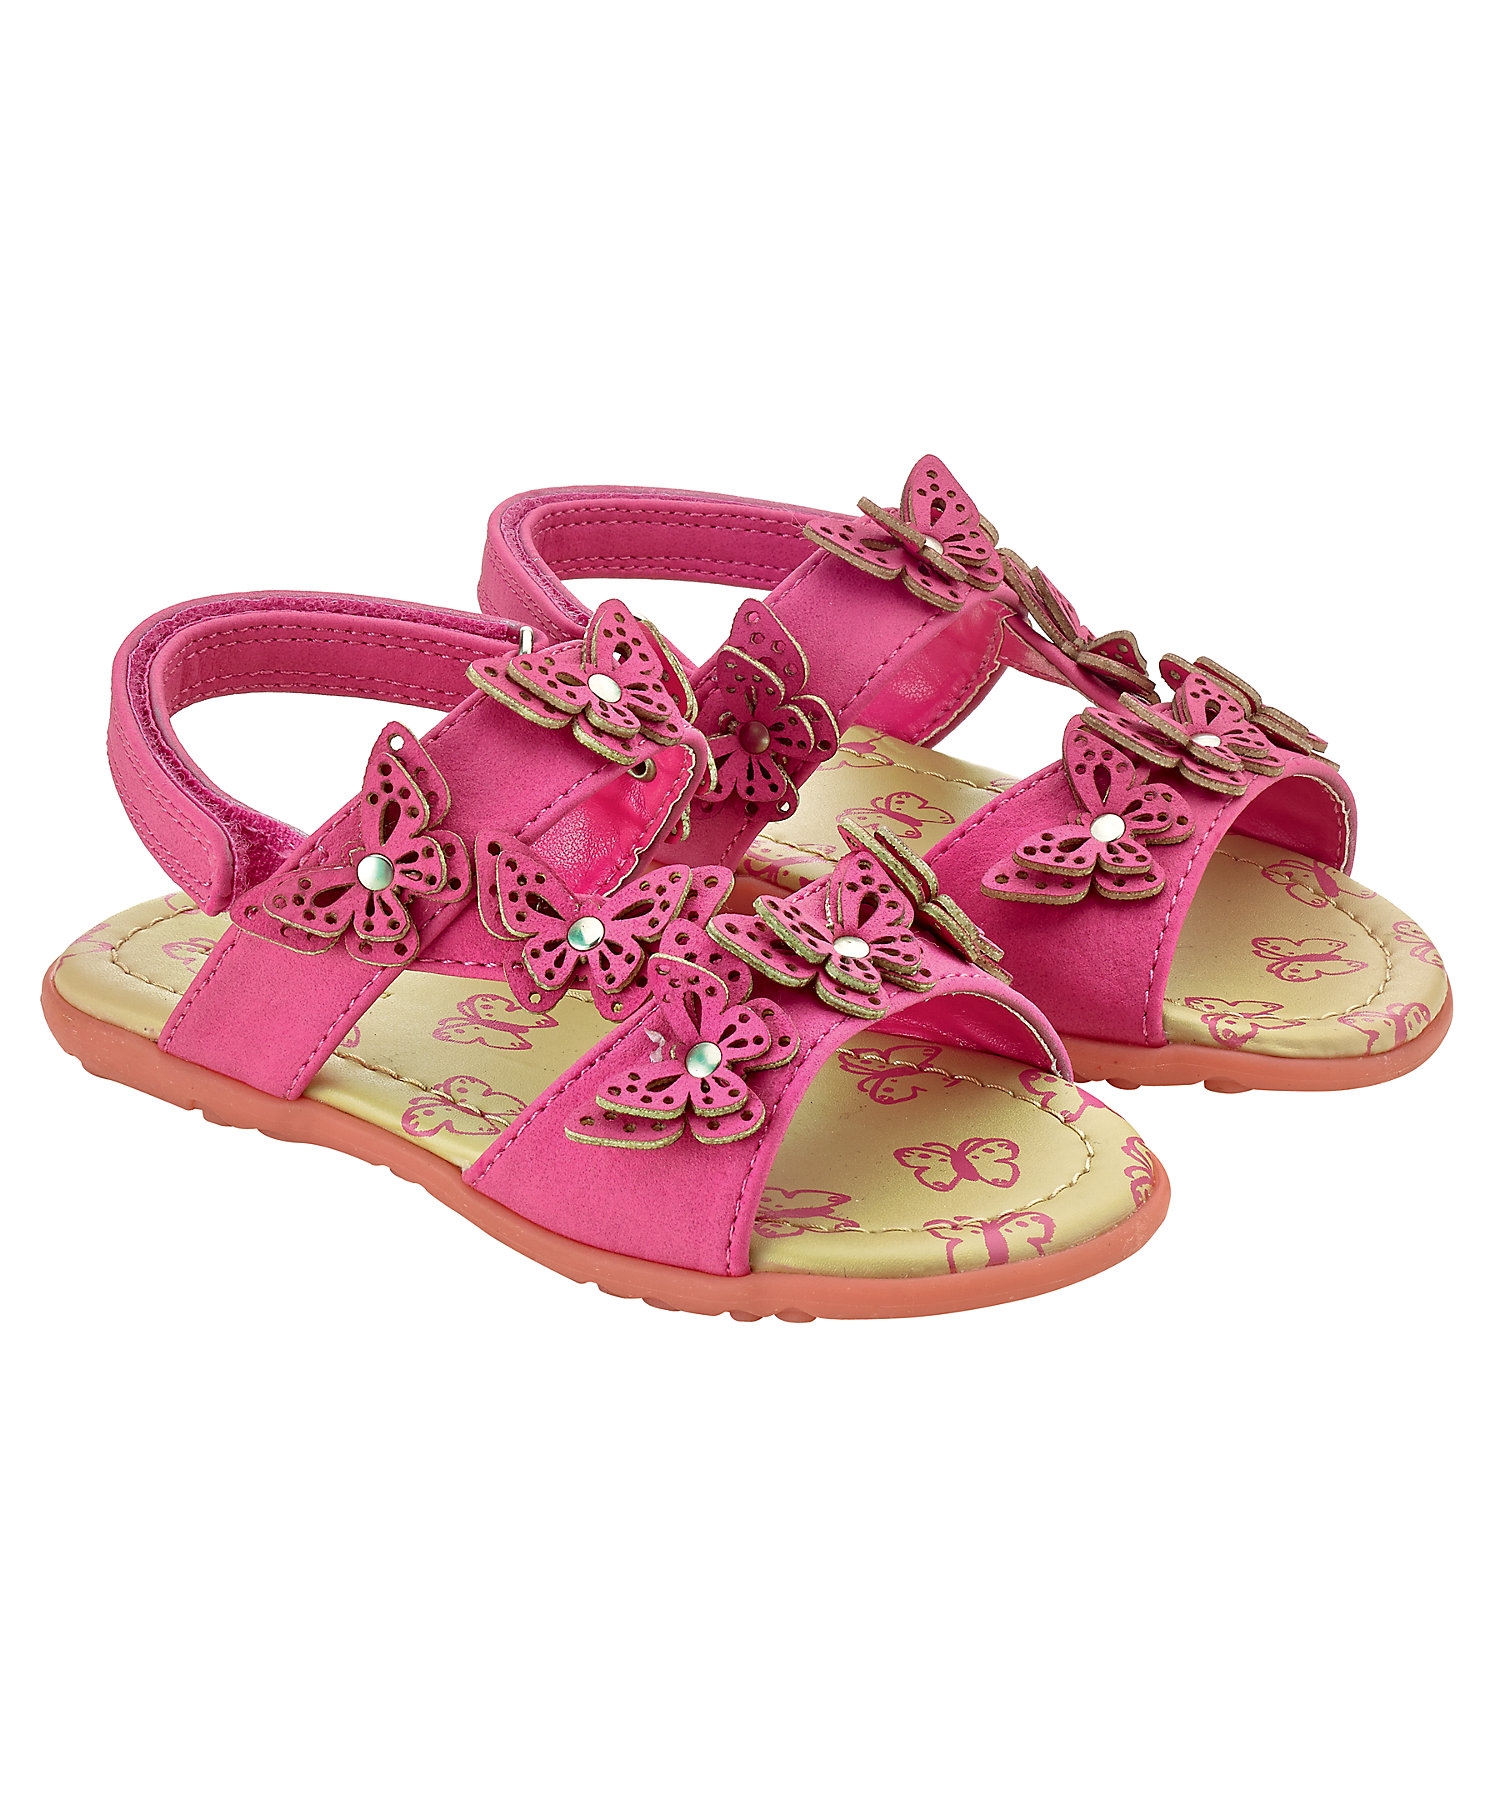 Mothercare | Girls Sandals Butterfly Design - Pink